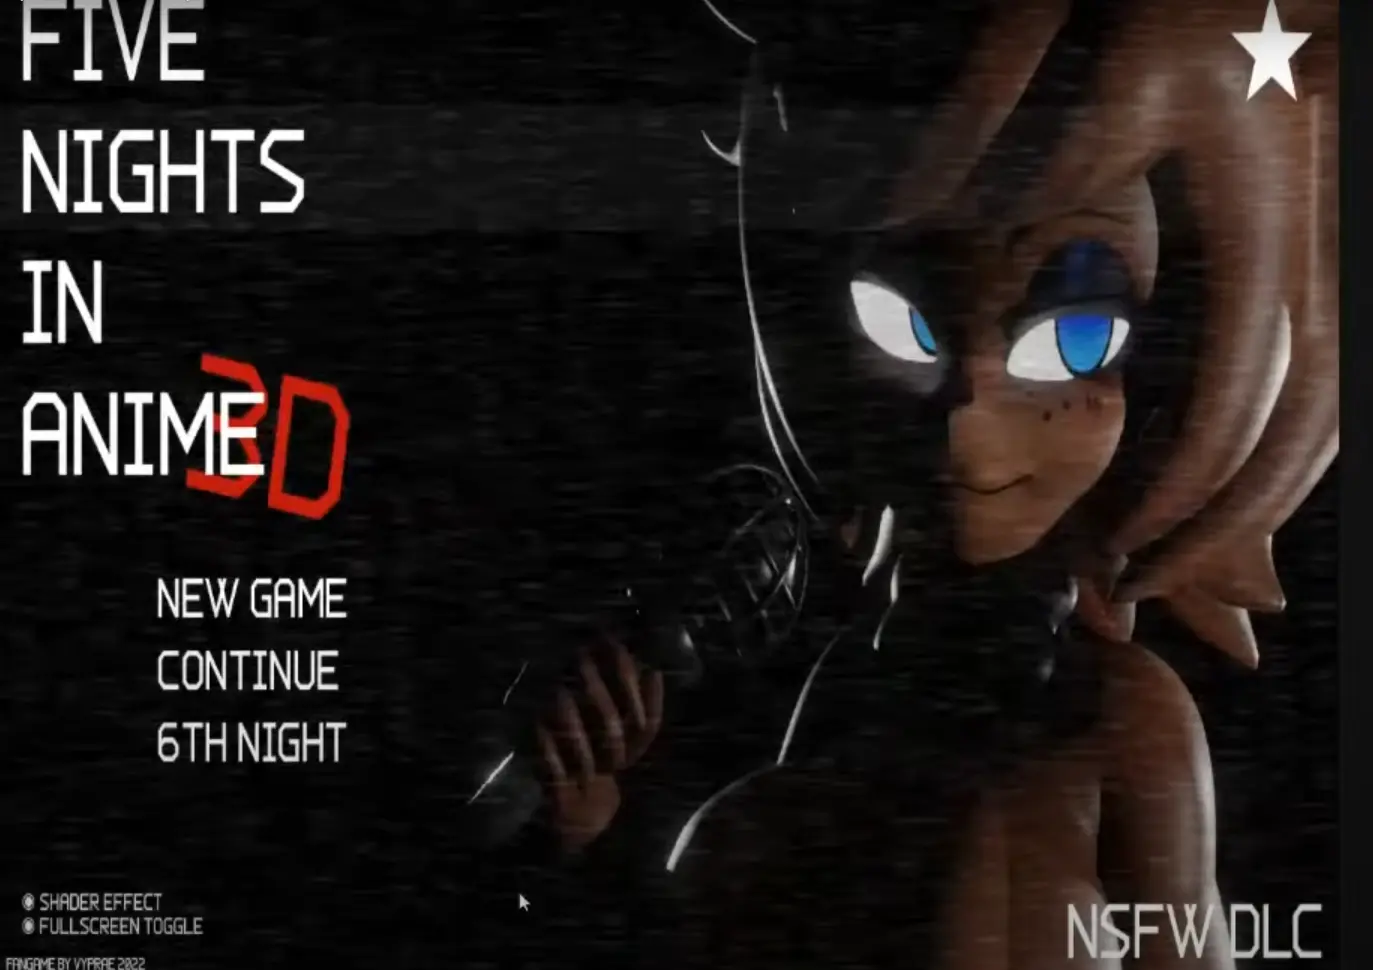 Five Nights in Anime 3D main image